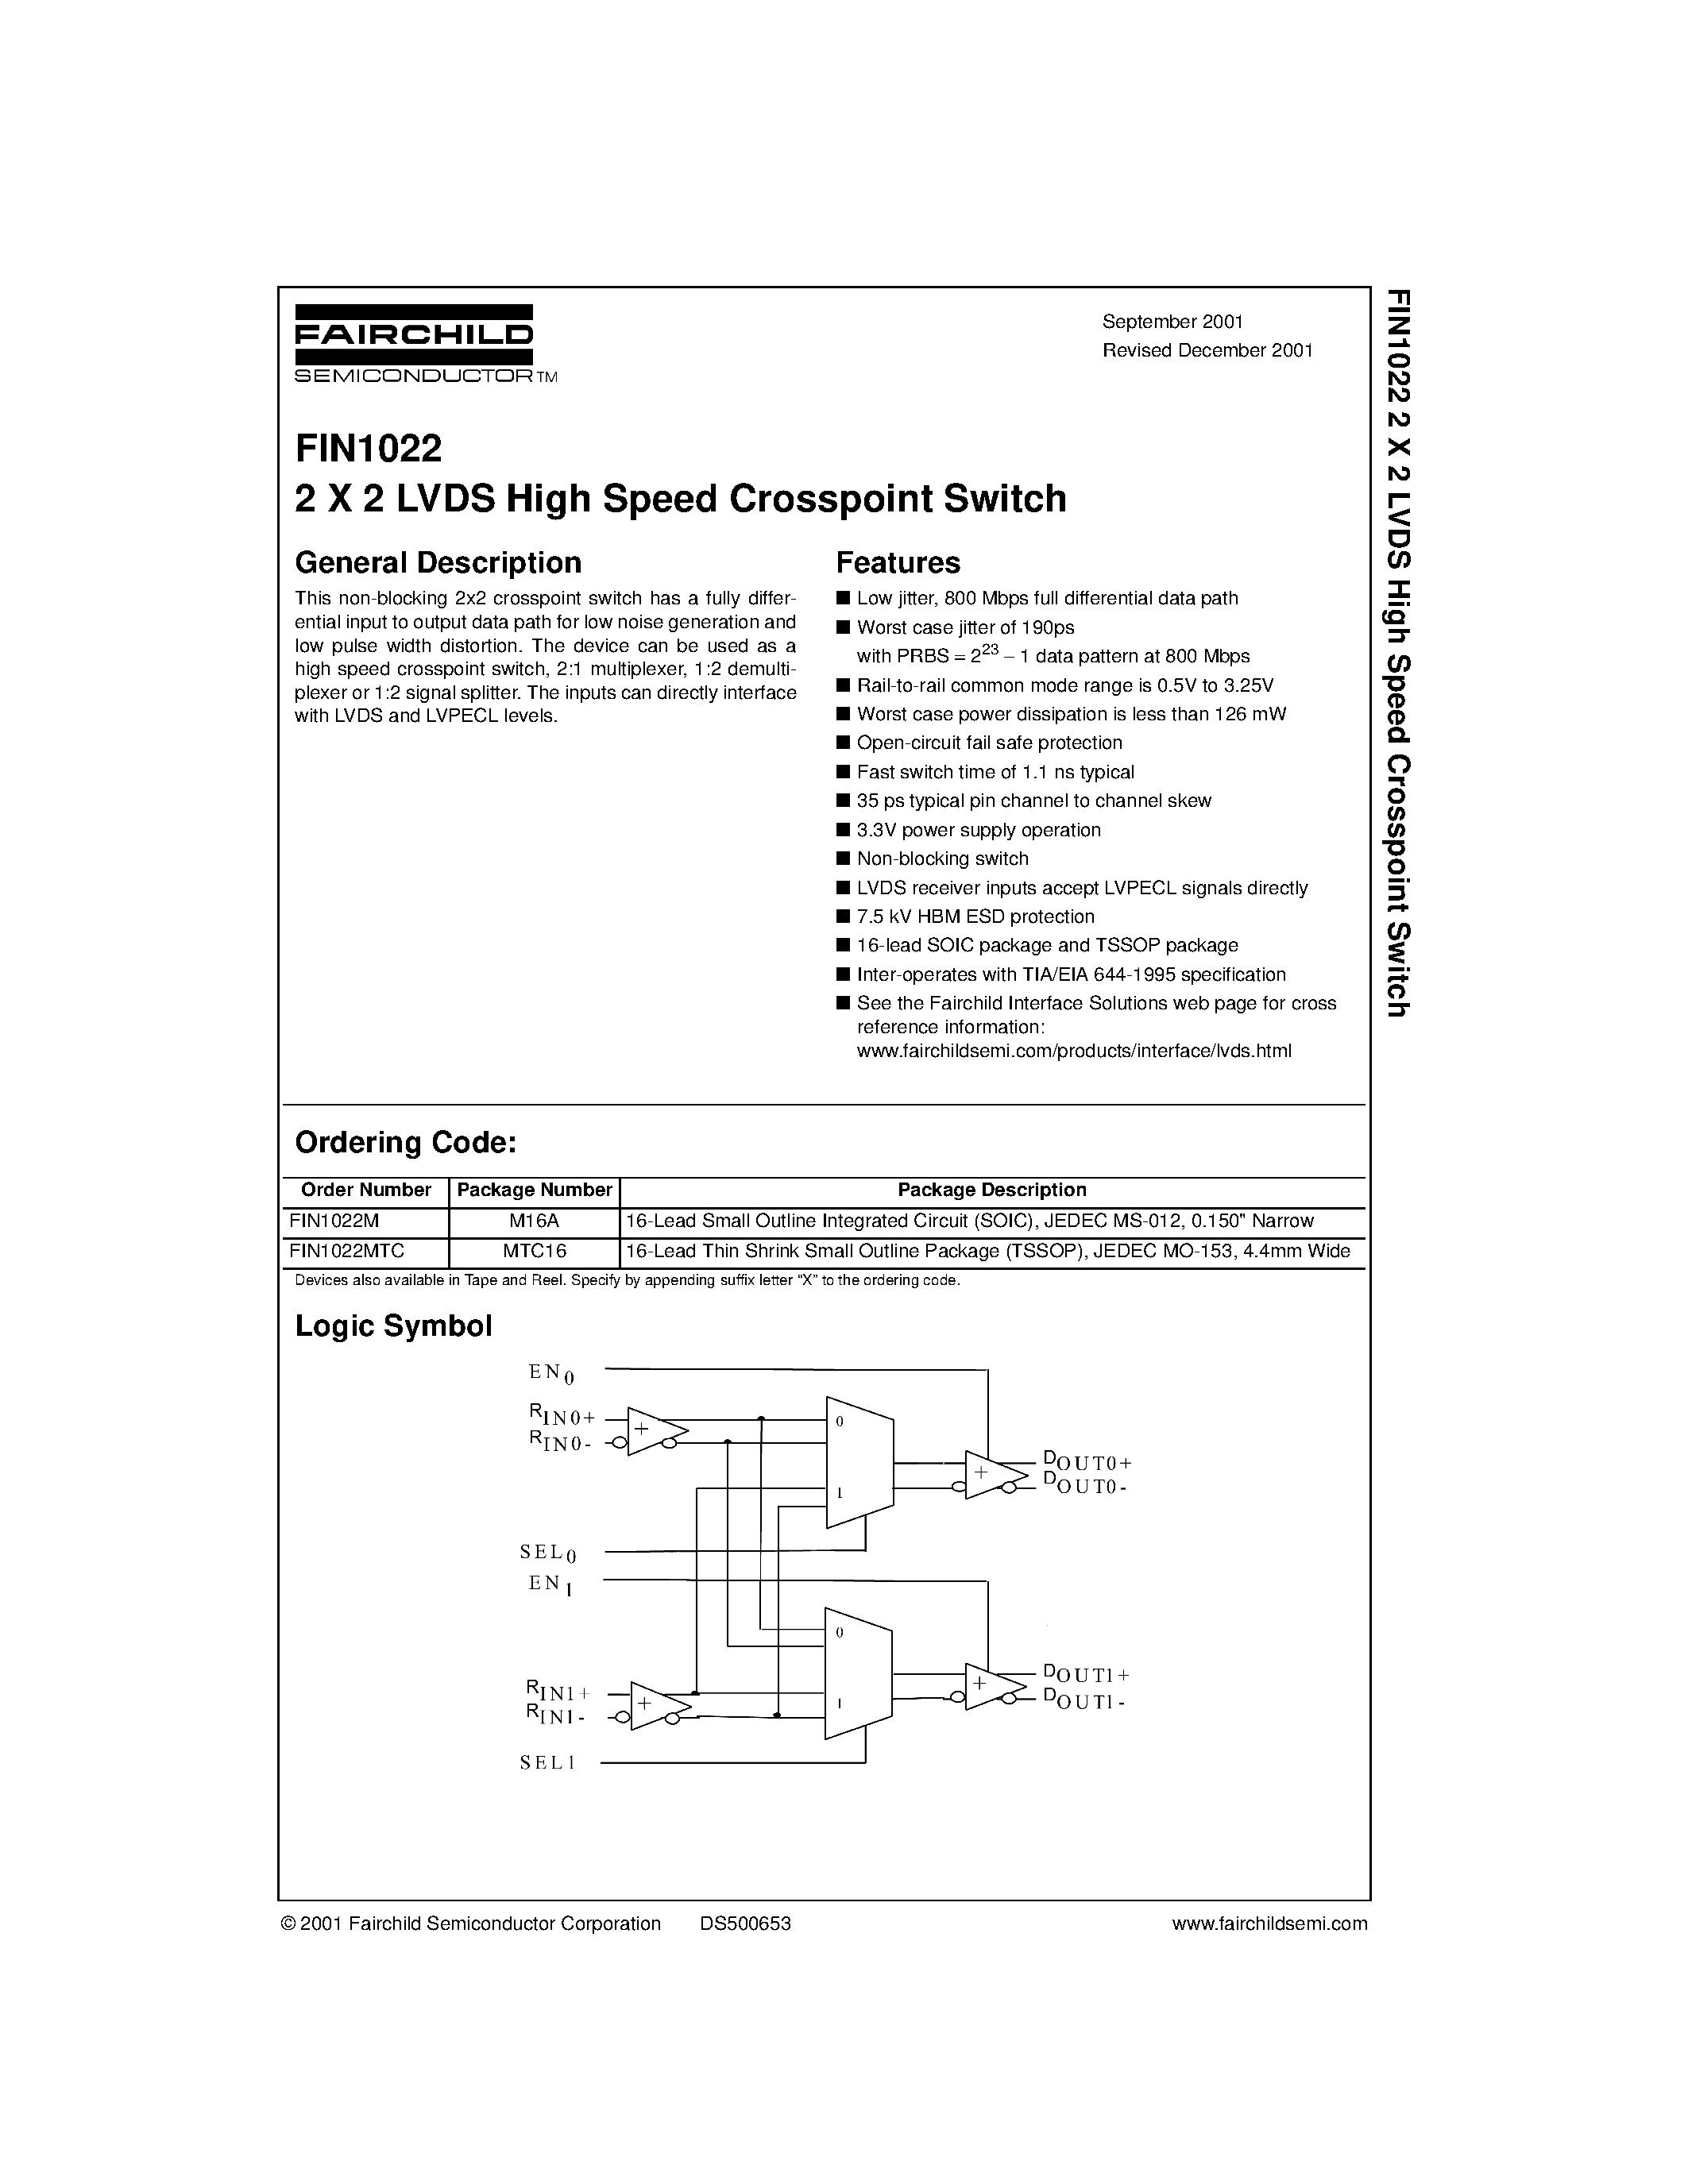 Datasheet FIN1022 - 2 X 2 LVDS High Speed Crosspoint Switch page 1